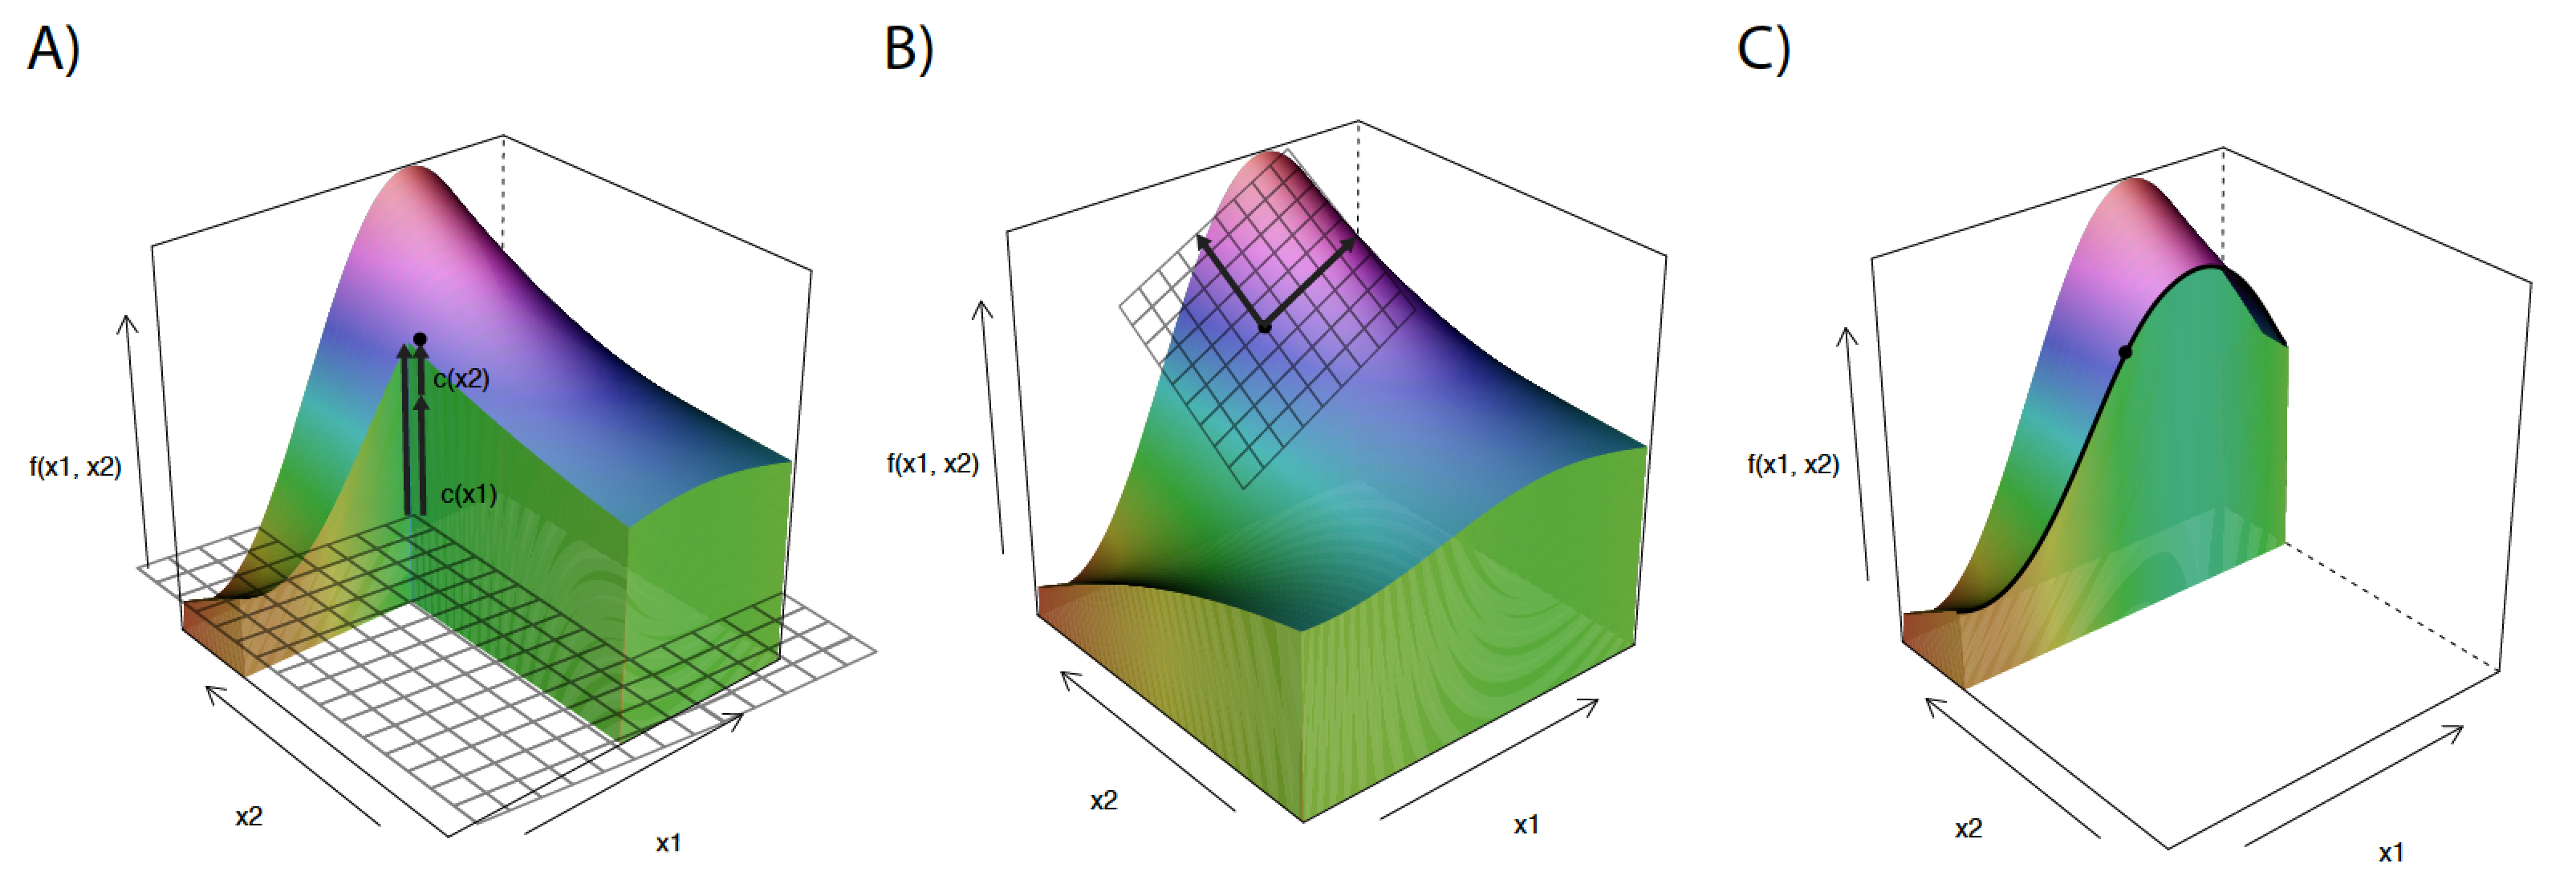 Illustration of different approaches to instance-level exploration. The plots present response (prediction) surface for a (black-box) model that is a function of two explanatory variables. We are interested in understanding the model response (prediction) at a single point (observation). Panel A illustrates the concept of variable attributions. The additive effect of each variable shows how does the prediction for the particular observation differ from the average. Panel B illustrates the concept of explanations through local models. A simpler glass-box model is used to approximate the black-box model around the point (observation) of interest. It describes the local behaviour of the model. Panel C presents a “What-if” analysis with a ceteris-paribus profile. The profile shows the model response (prediction) as a function of a single explanatory variable while keeping the values of all other explanatory variables fixed.